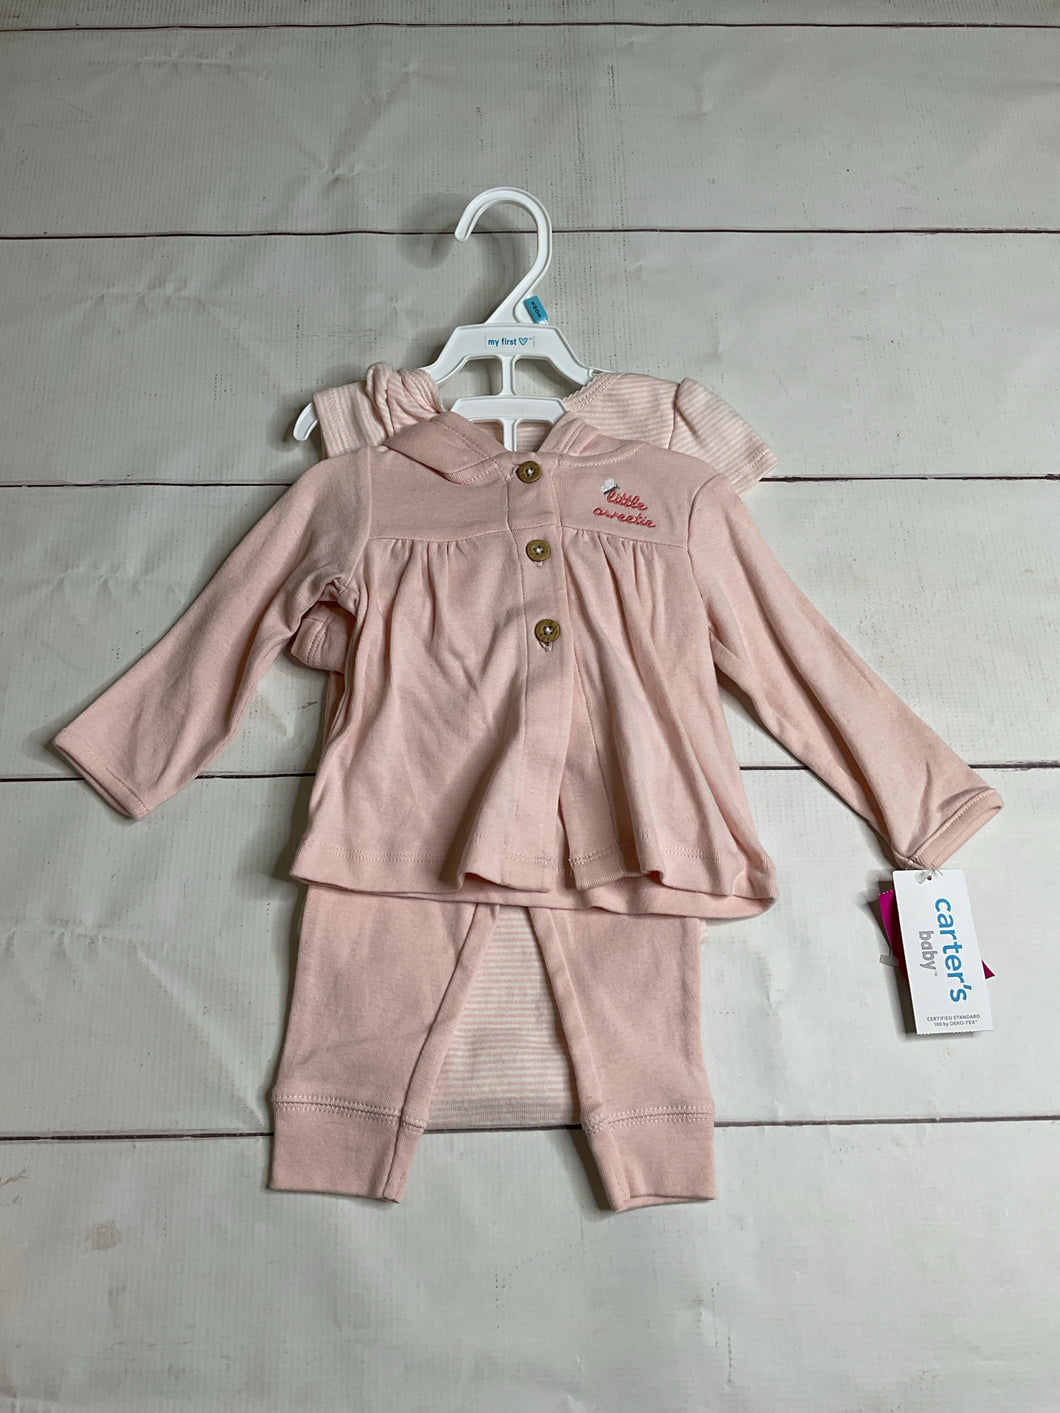 Carter's Size 6M 3pc Outfit